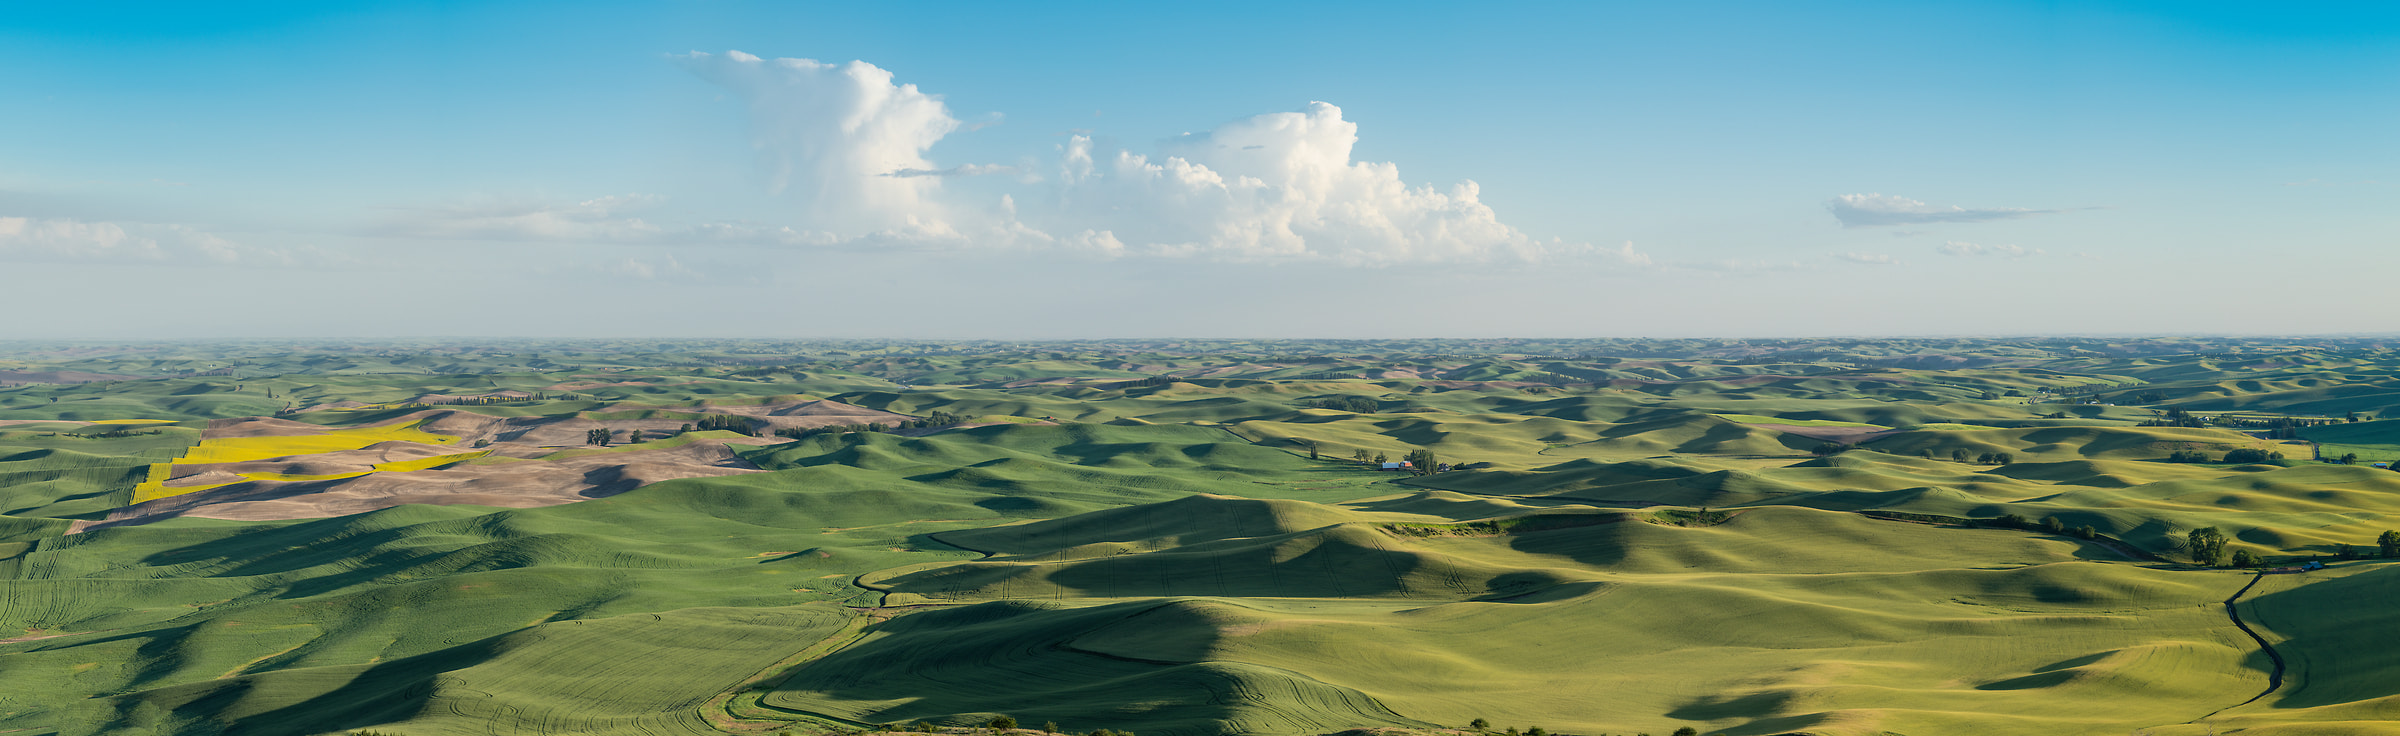 313 megapixels! A very high resolution, large-format VAST photo print of a pastoral landscape with rolling green hills of farmland; photograph created by Greg Probst in Steptoe Butte State Park, Washington.